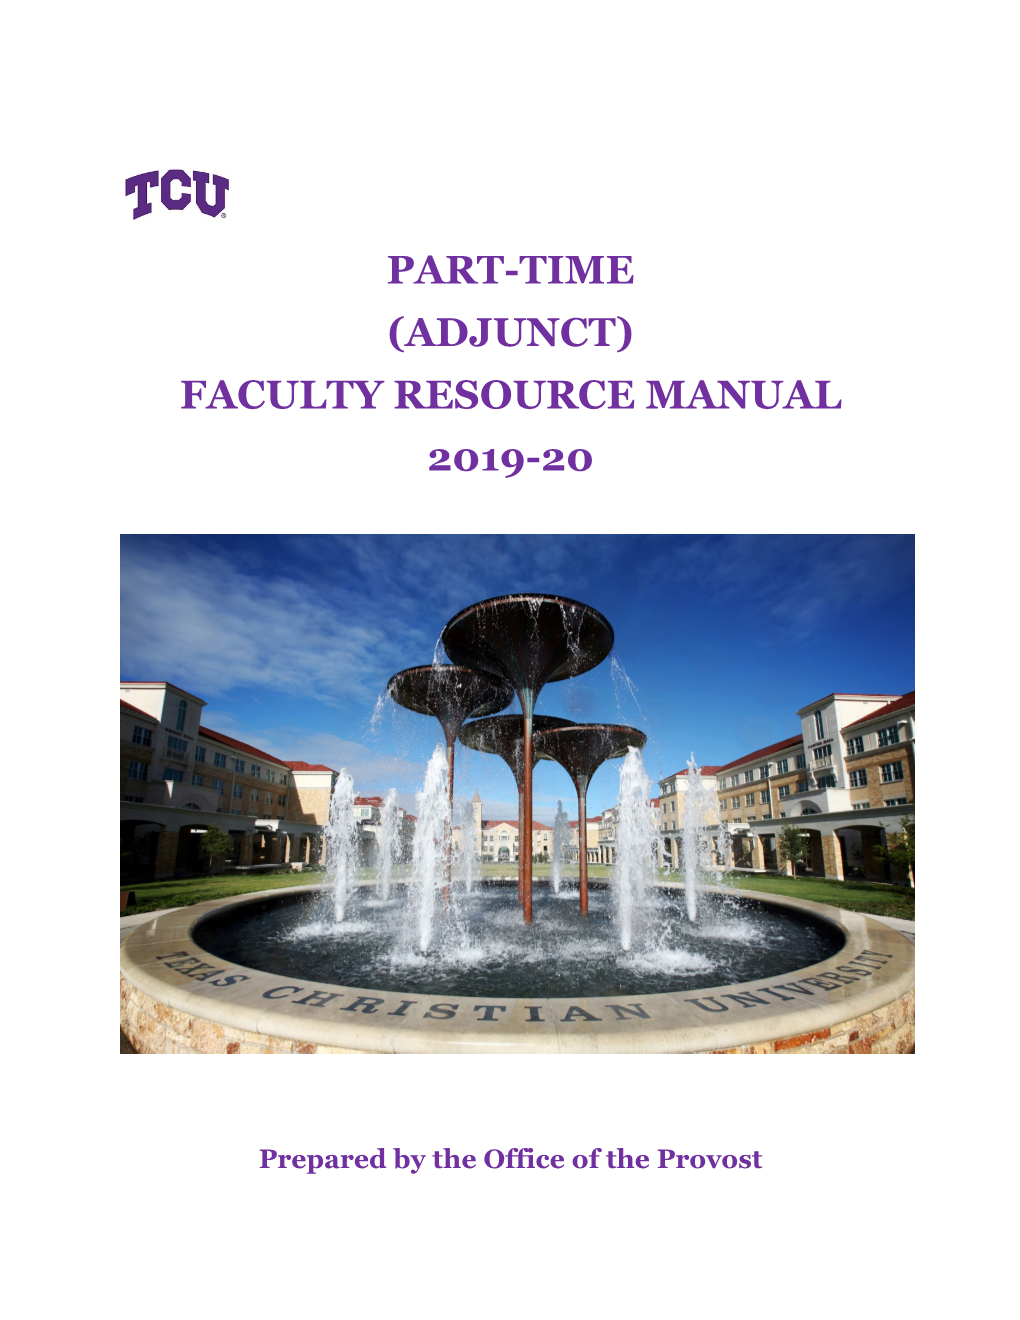 Part-Time (Adjunct) Faculty Resource Manual 2019-20